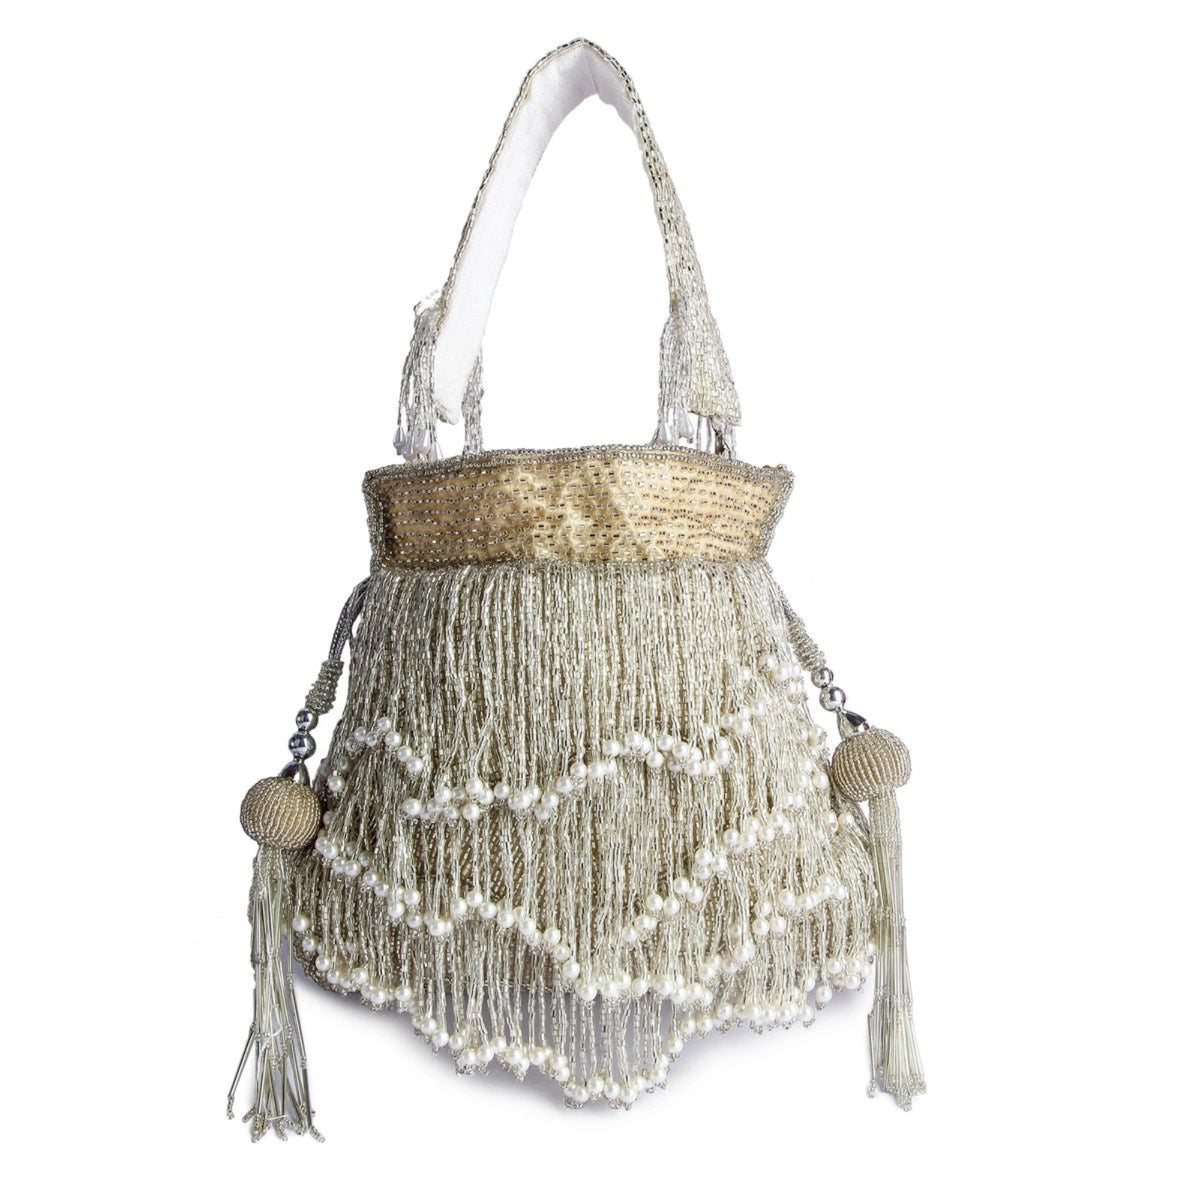 Fringy chic handembroidered potli